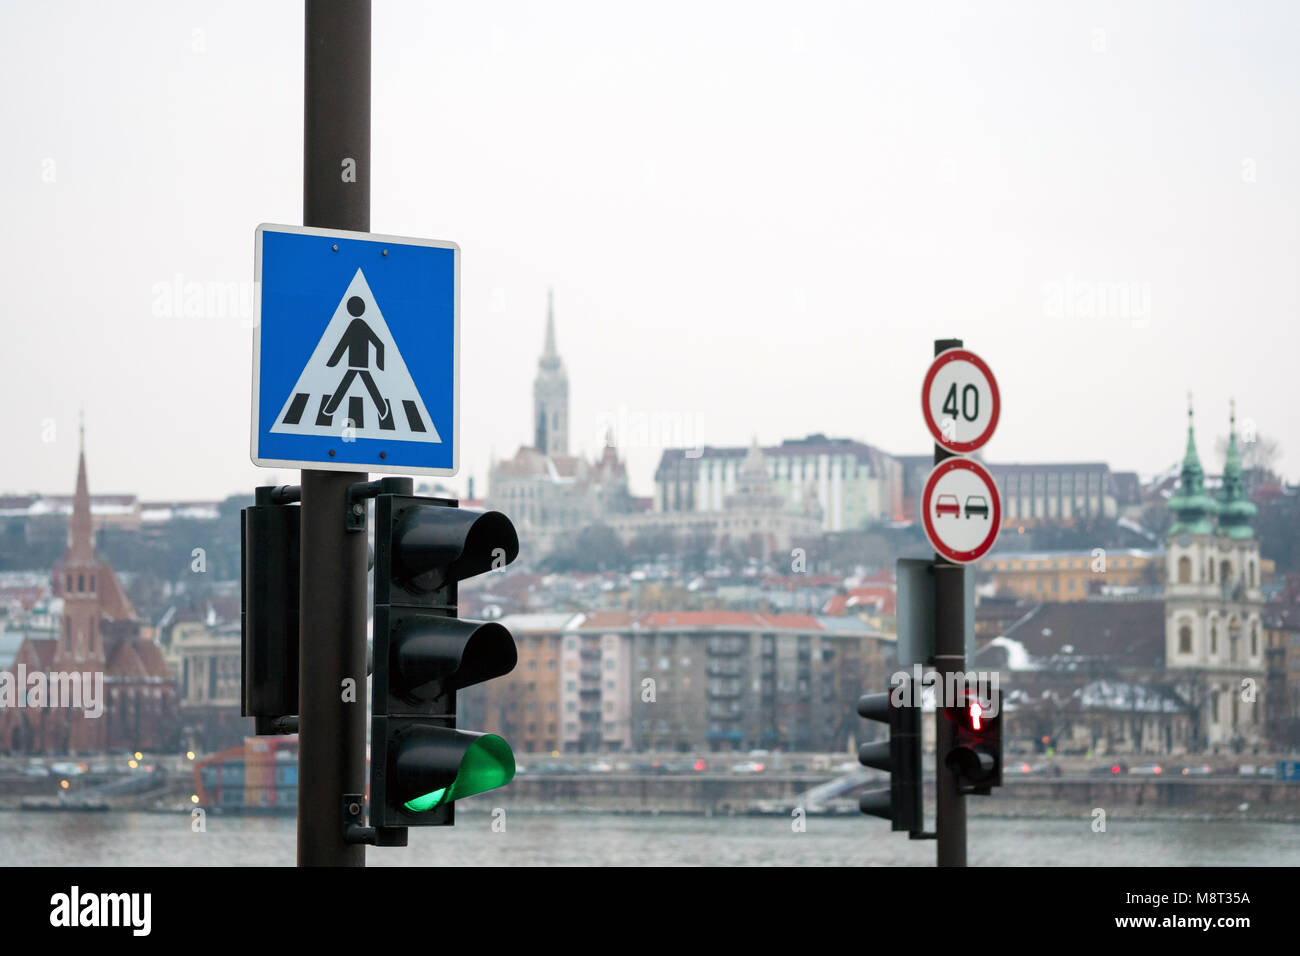 Semaphores with pedestrian crossing sign and speed limit sign in Budapest, Hungary Stock Photo